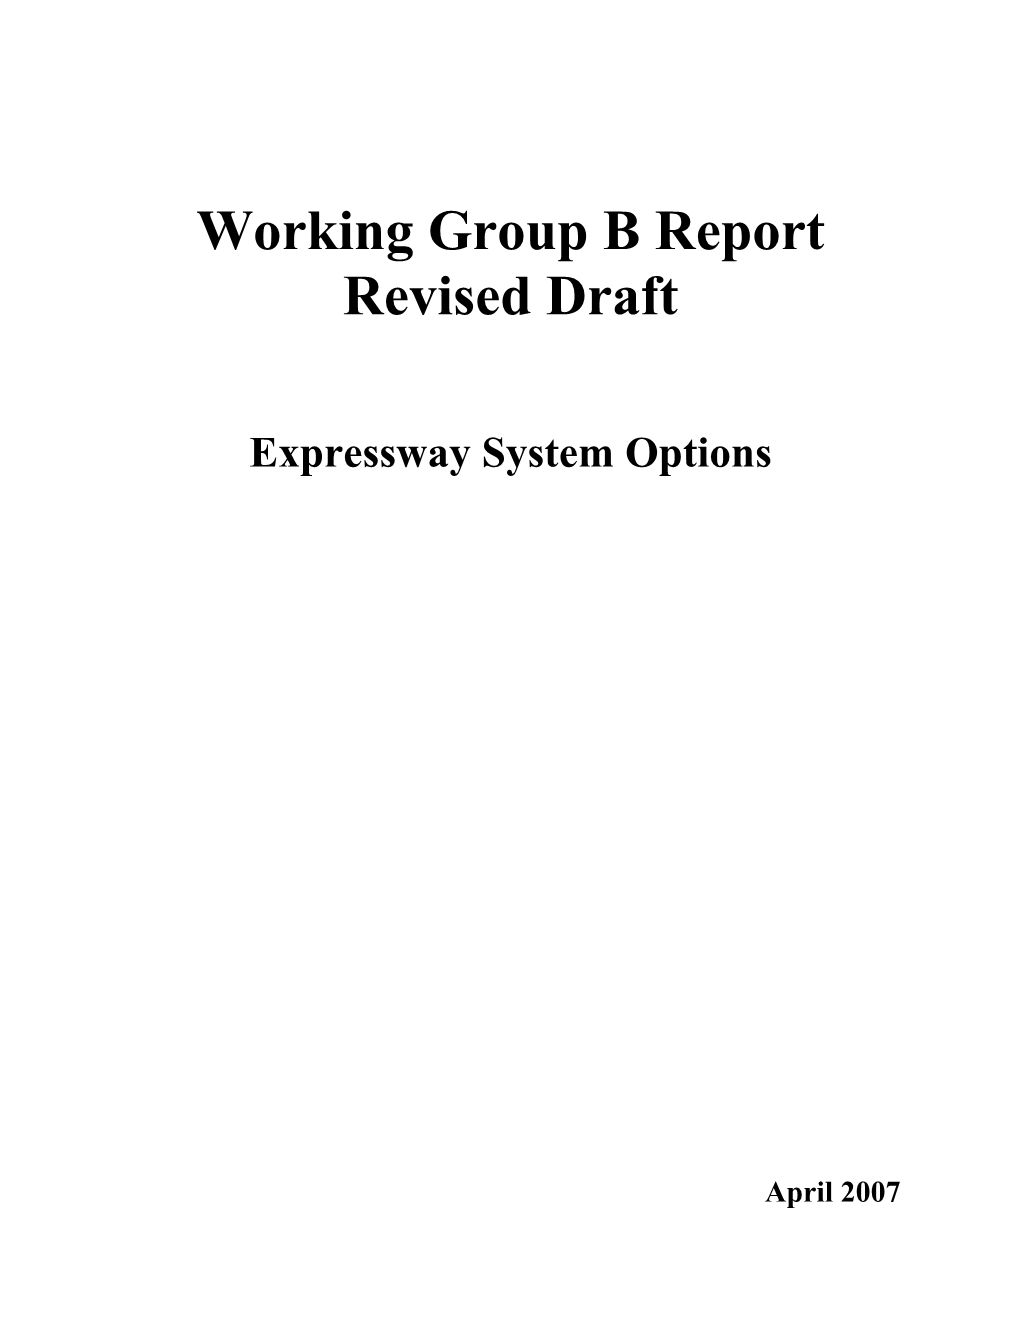 Working Group B Report Revised Draft